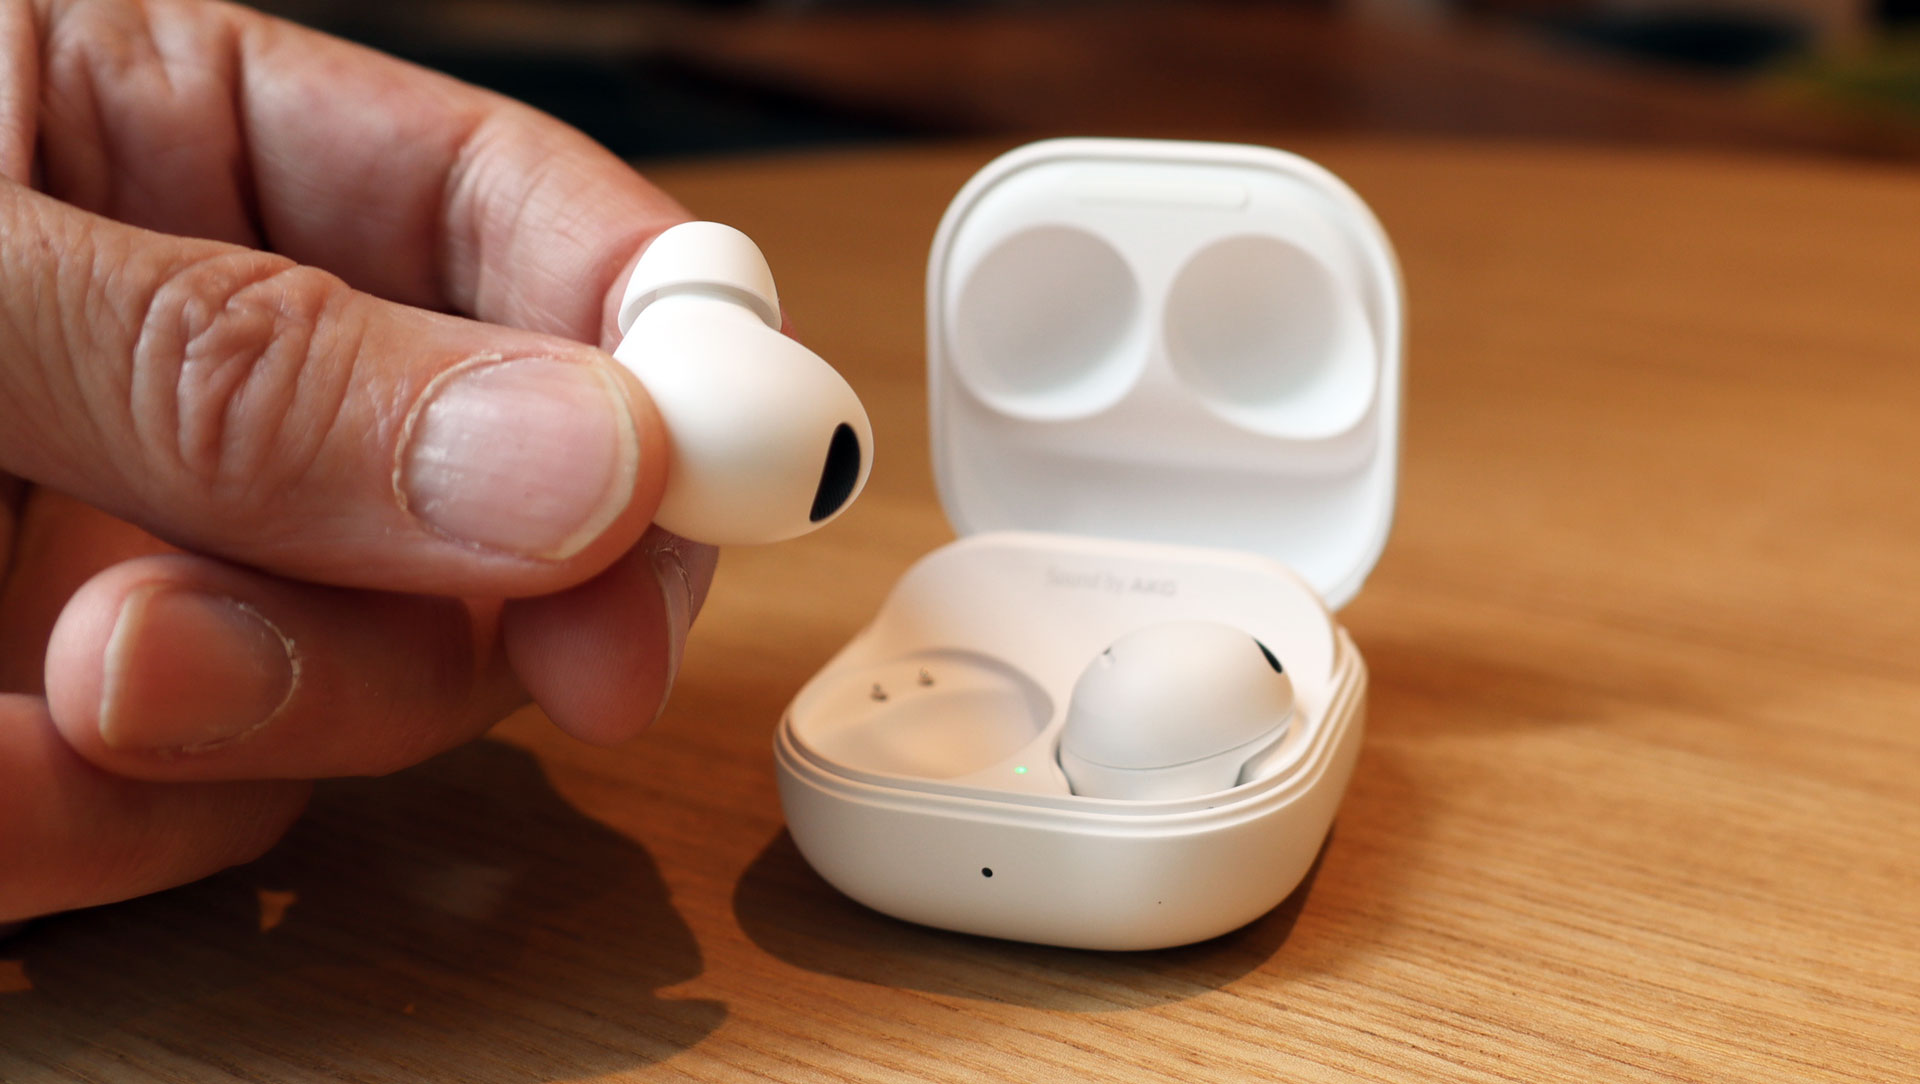 Samsung Galaxy Buds 2 Pro with one inside and one outside the case